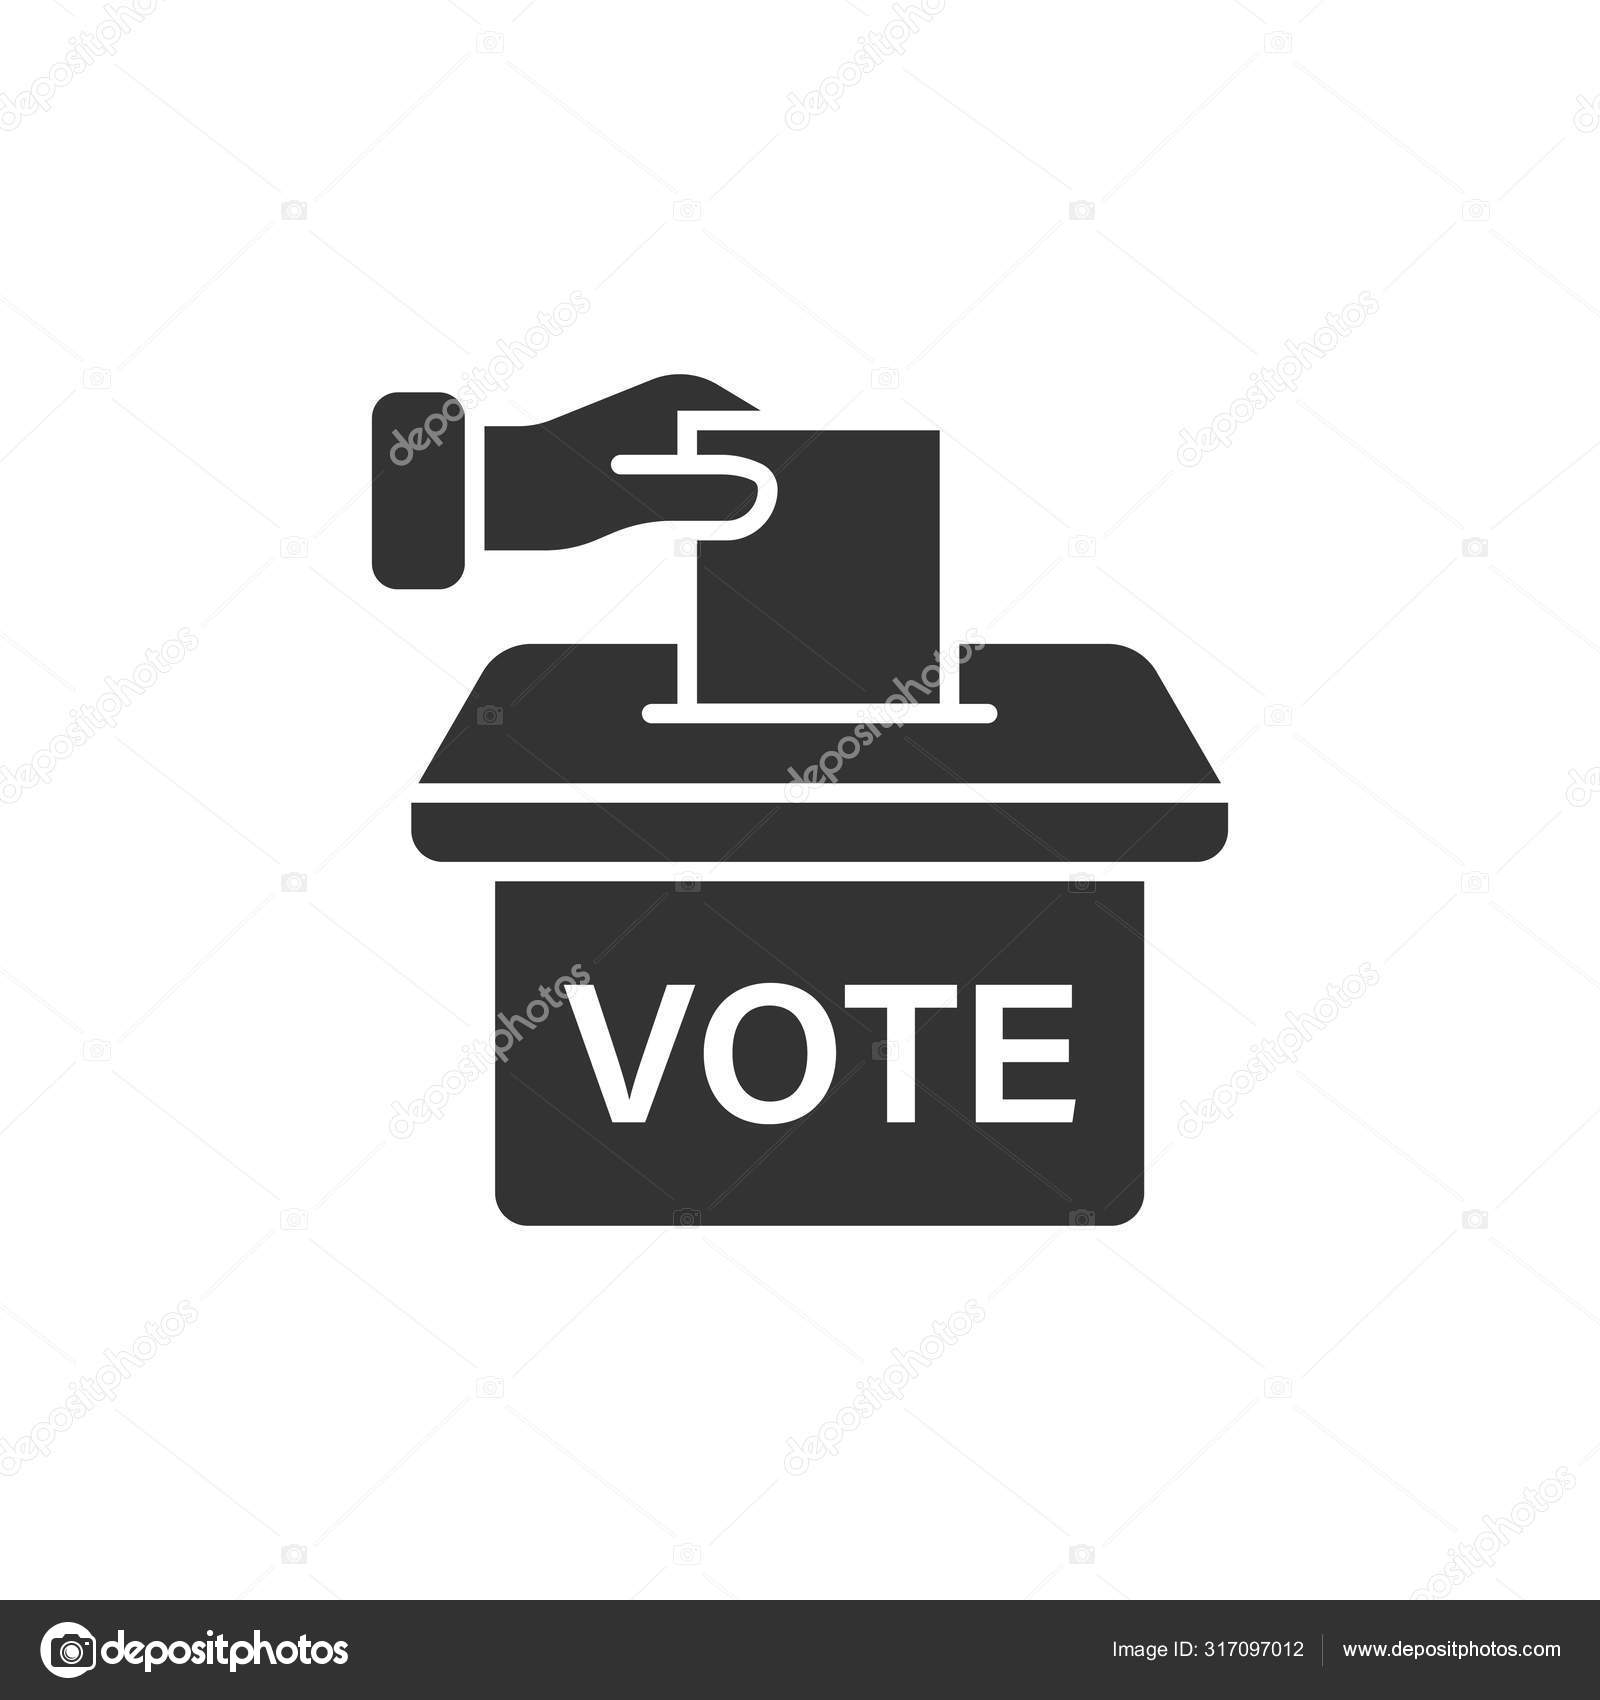 Vote Icon In Flat Style Ballot Box Vector Illustration On White Vector Image By C Sanek Vector Stock